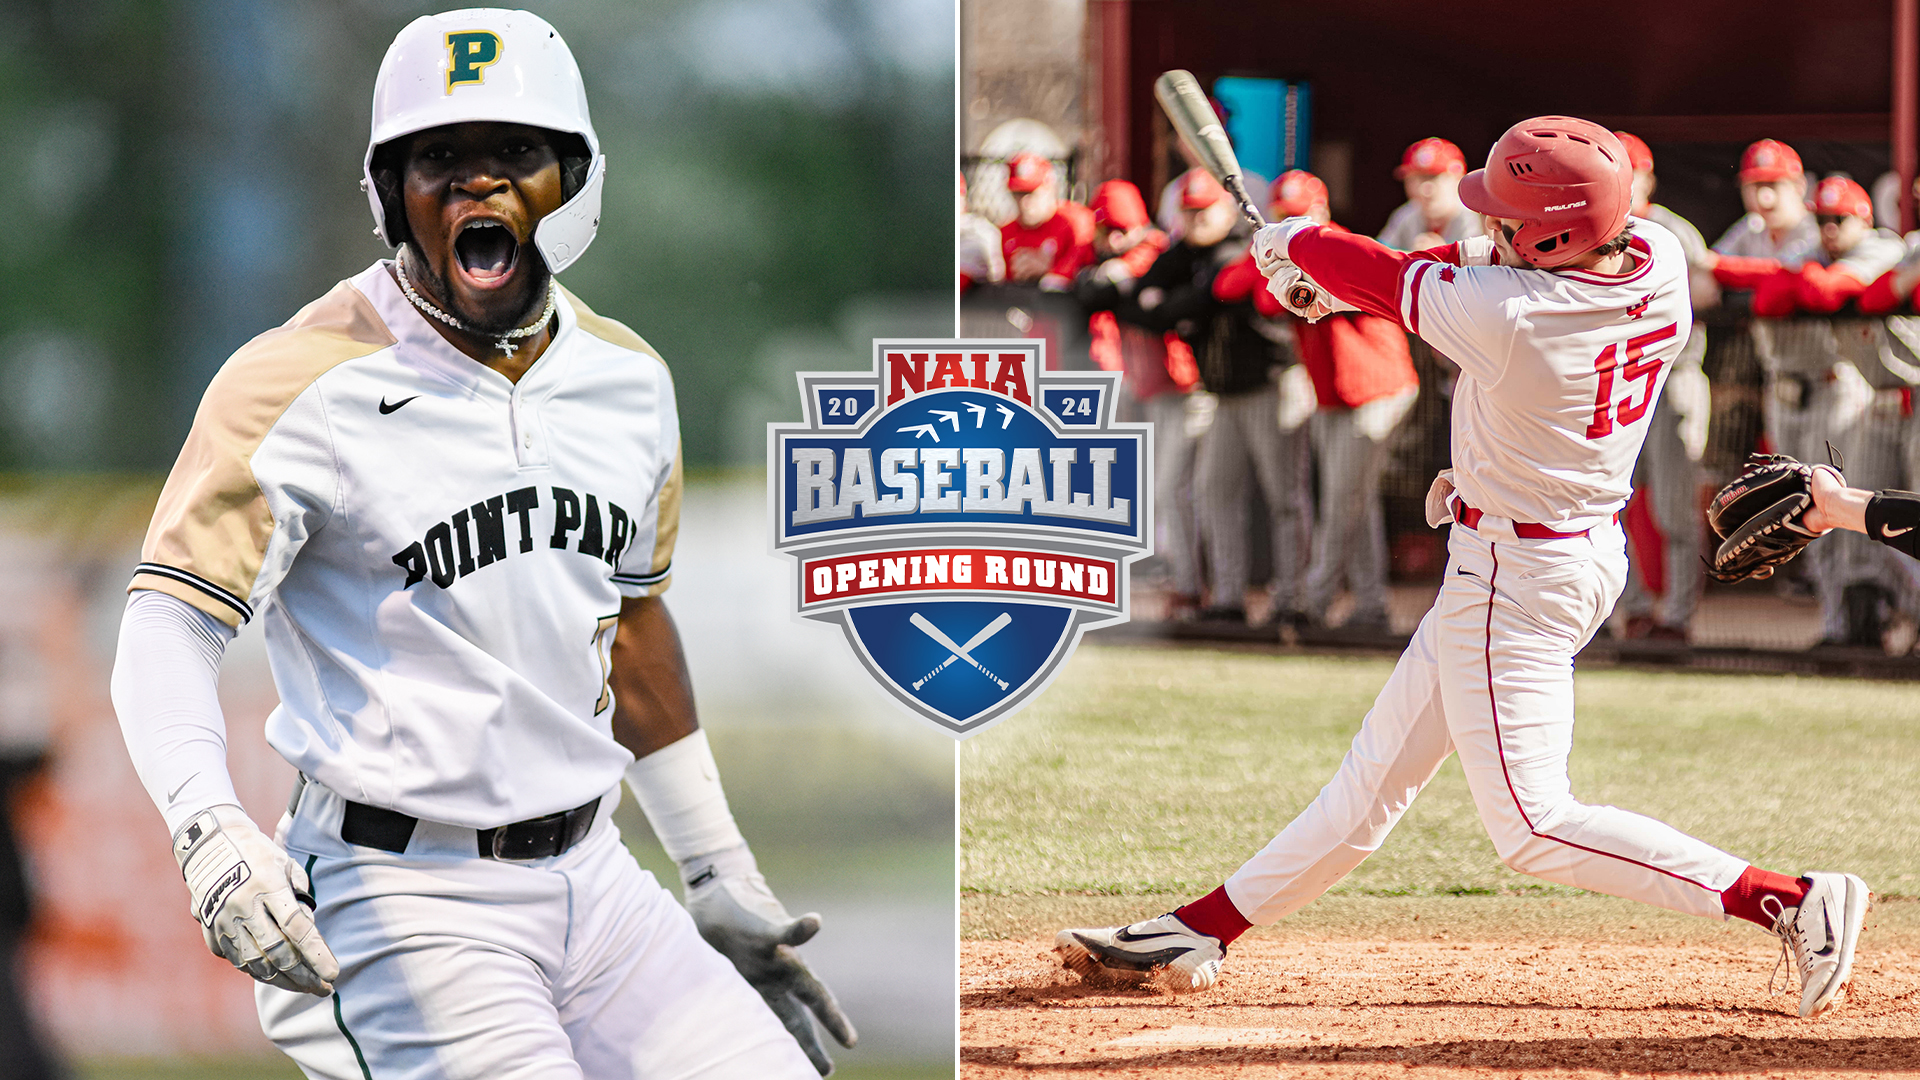 Point Park and IU Southeast will open play in the NAIA Baseball National Championship Opening Round on Monday.